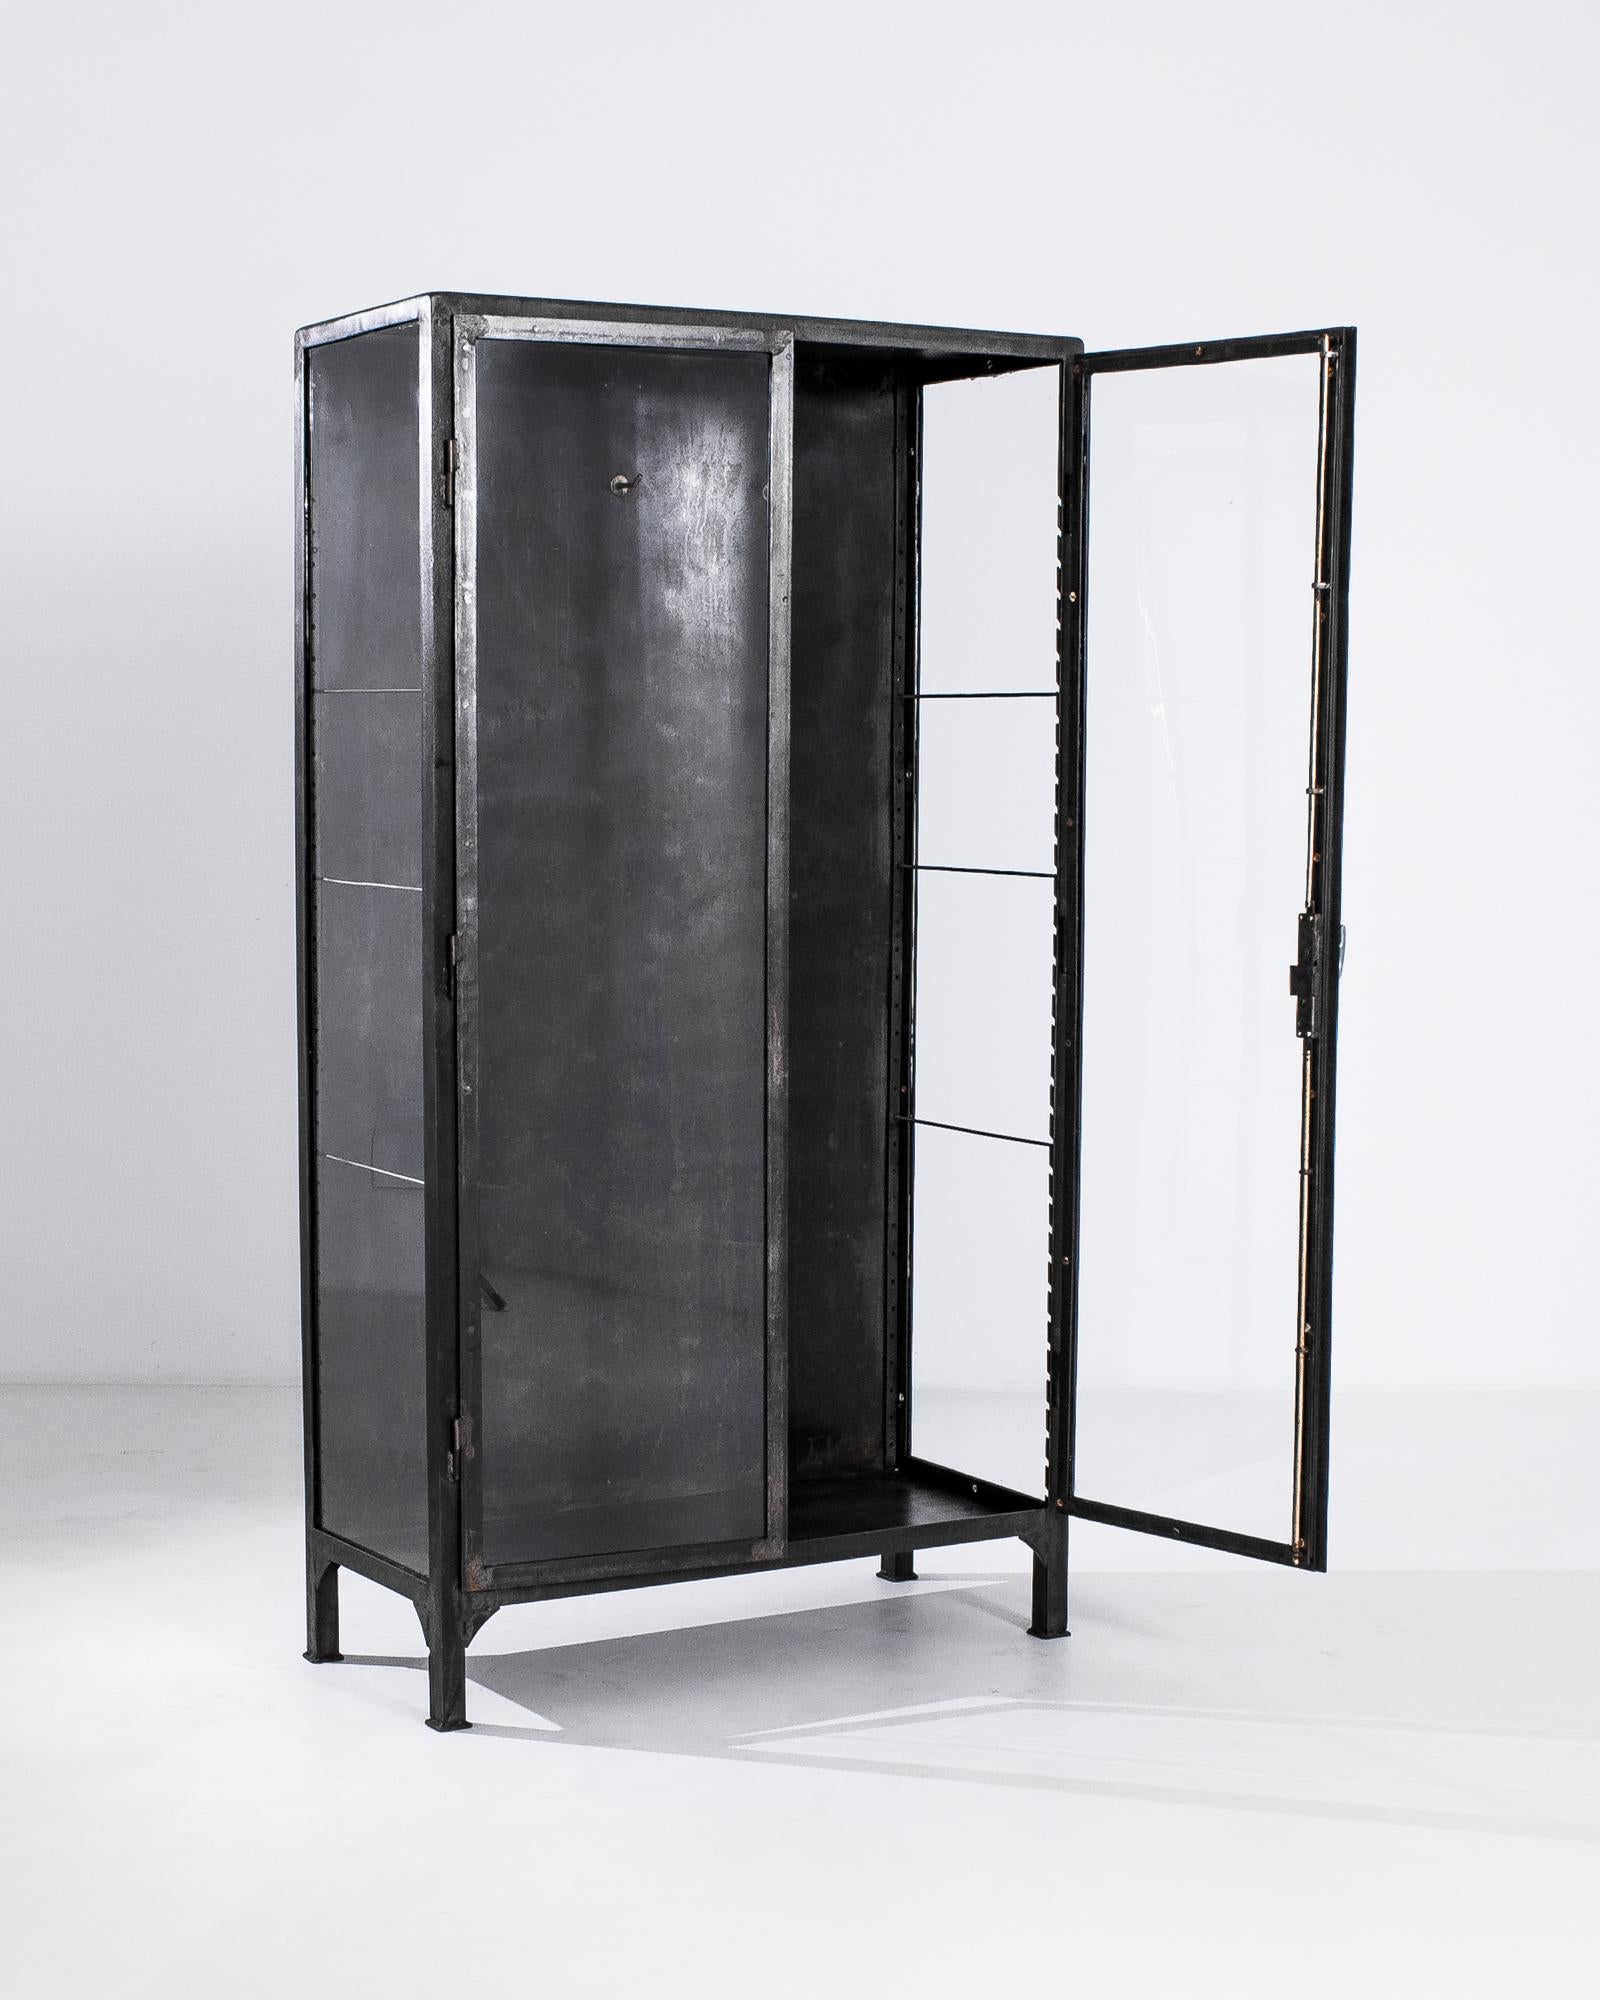 A metal display cabinet from 1950s Central Europe. Welded metal joinery, smoothed at the corners forms a utilitarian but eye-pleasing framing for this cabinet’s delicately composed glass shelves and drawers. Created with industrial mid-century